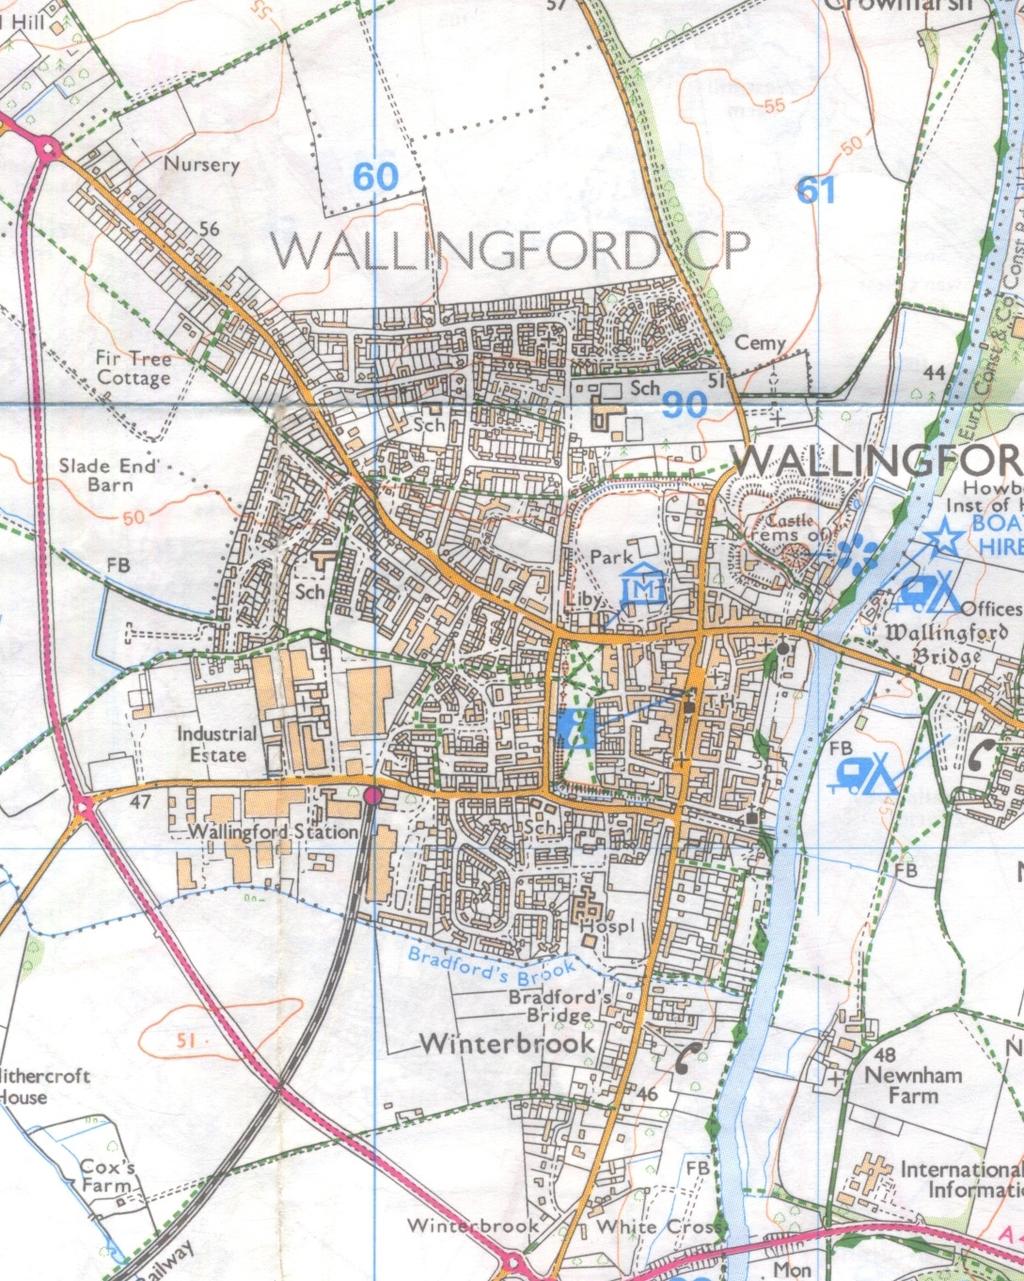 Banbury Bicester Witney Abingdon OXFORD Thame 90000 Wantage SITE Didcot Wallingford Henley-on -Thames 89000 SITE SU60000 61000 Glebe House, Reading Road, Wallingford, Oxfordshire, 2015